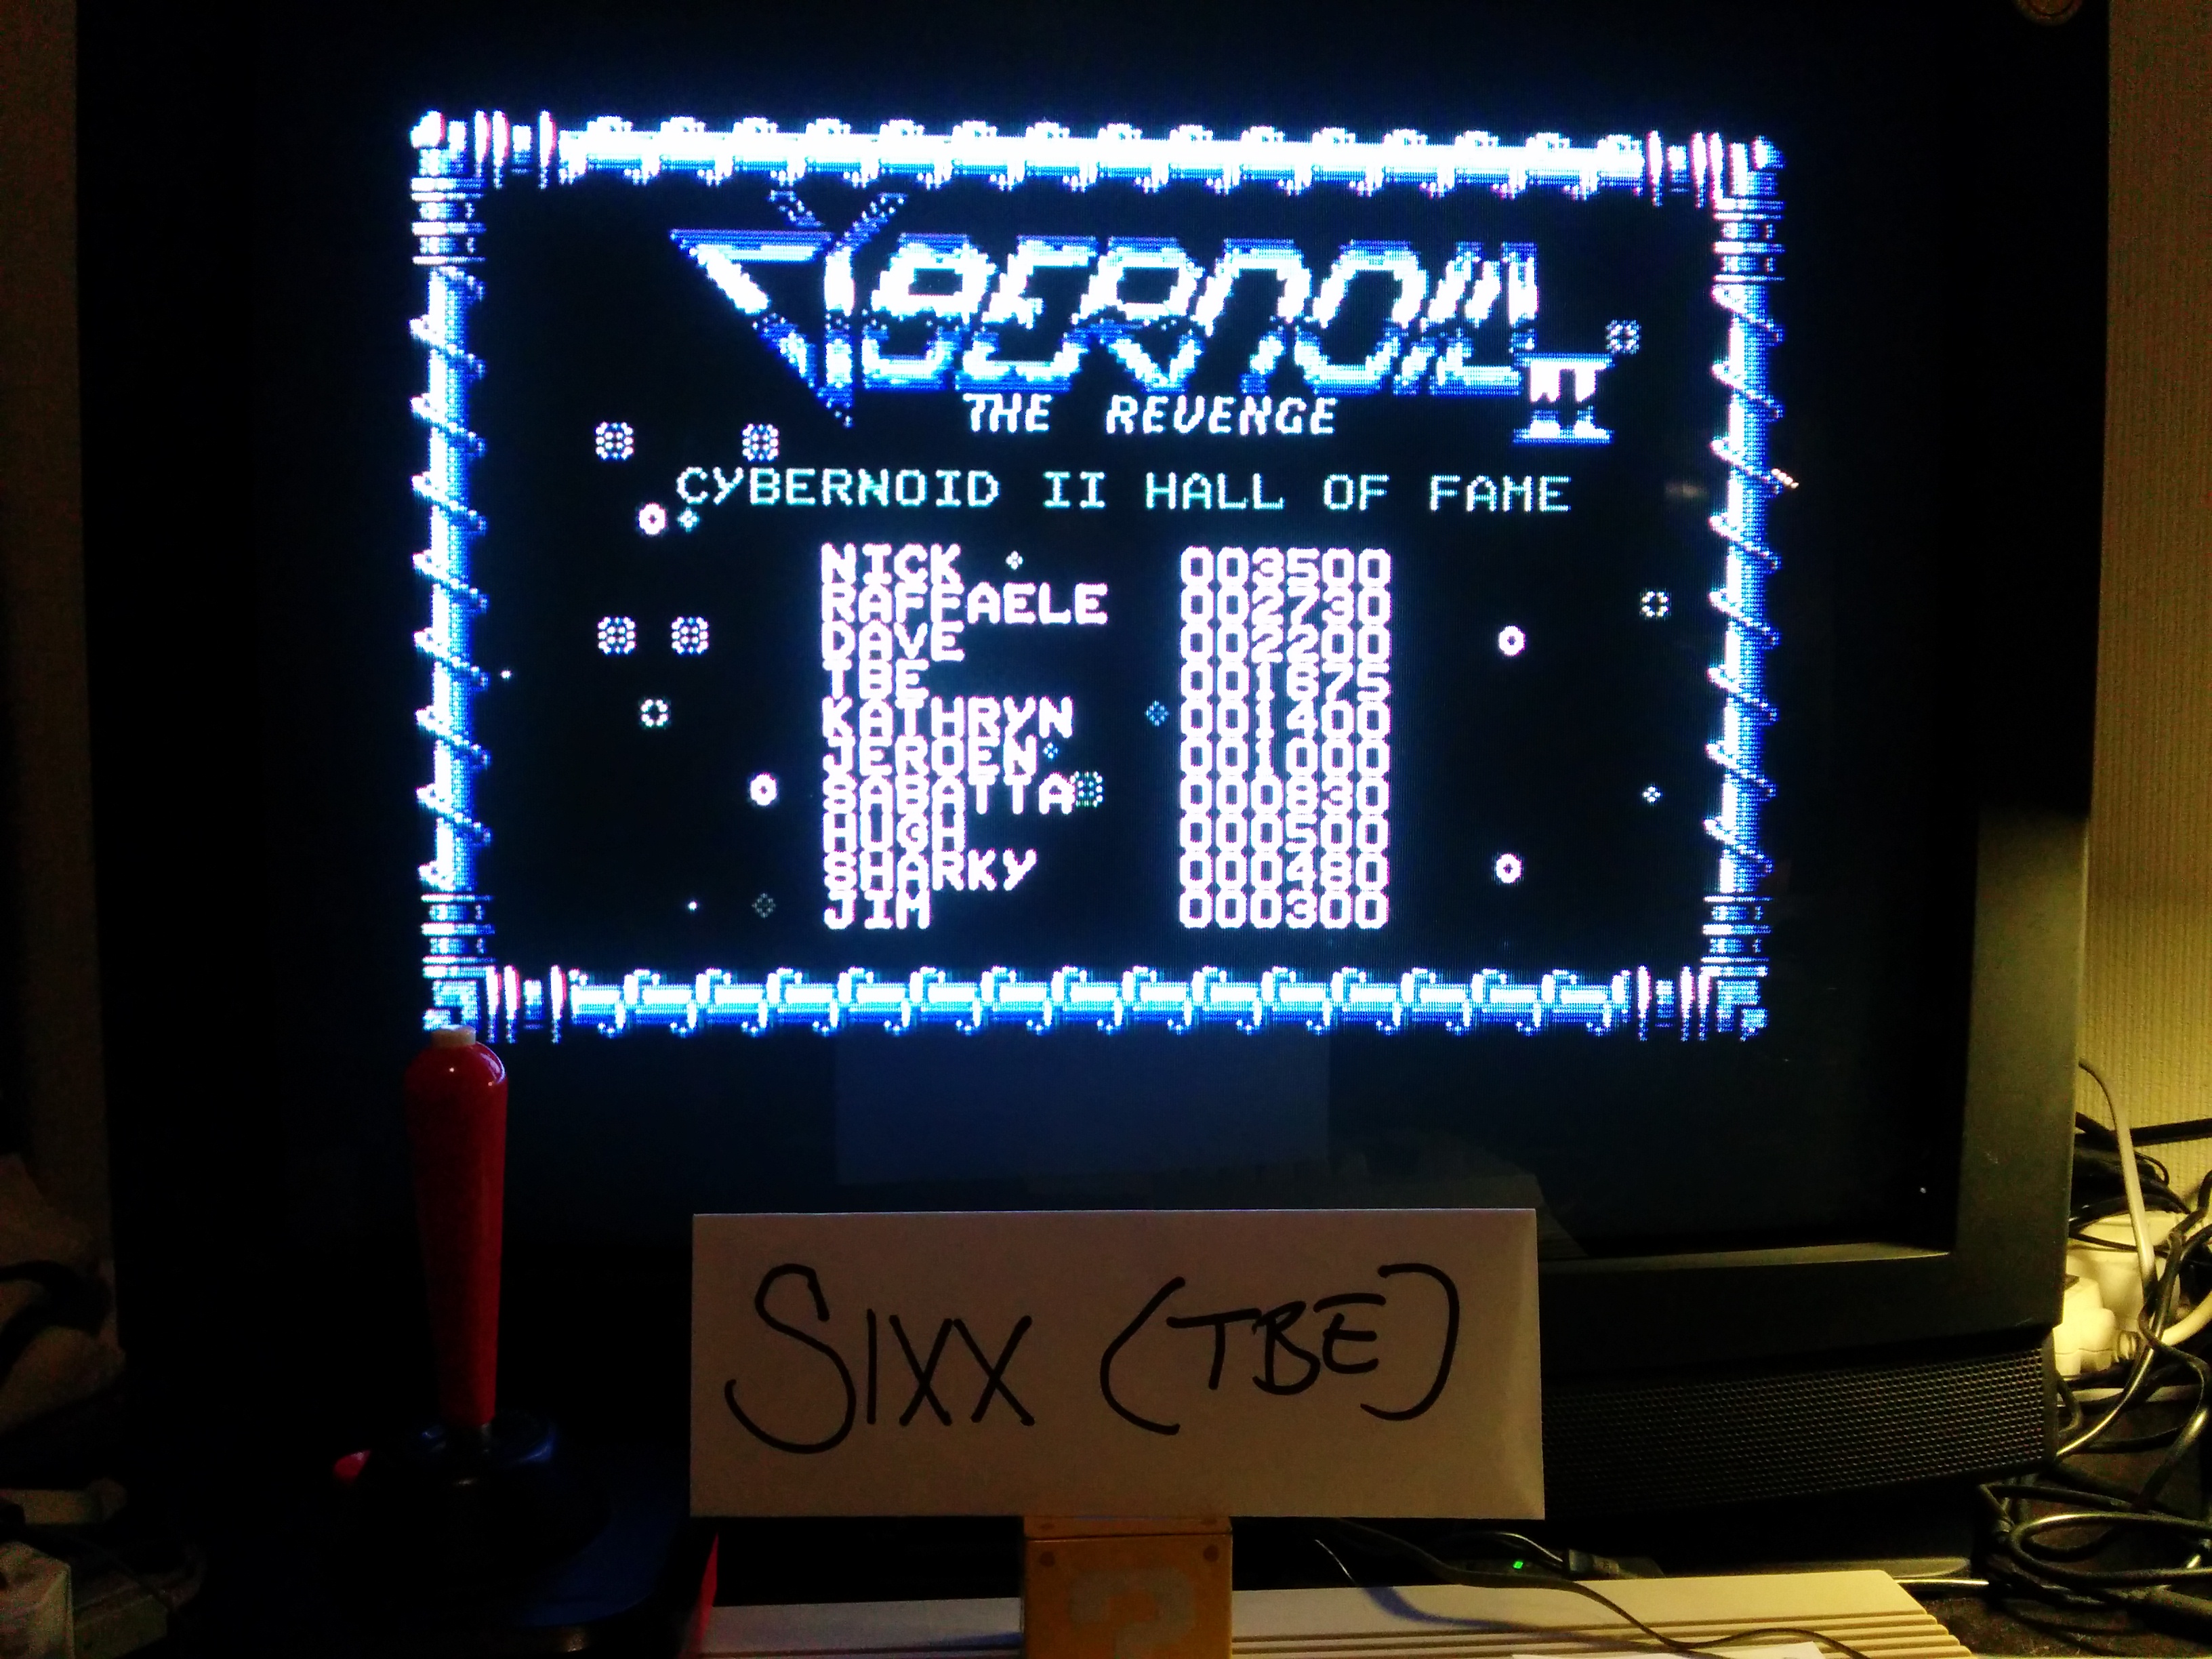 Sixx: Cybernoid 2 (Commodore 64) 1,675 points on 2014-04-09 16:54:39